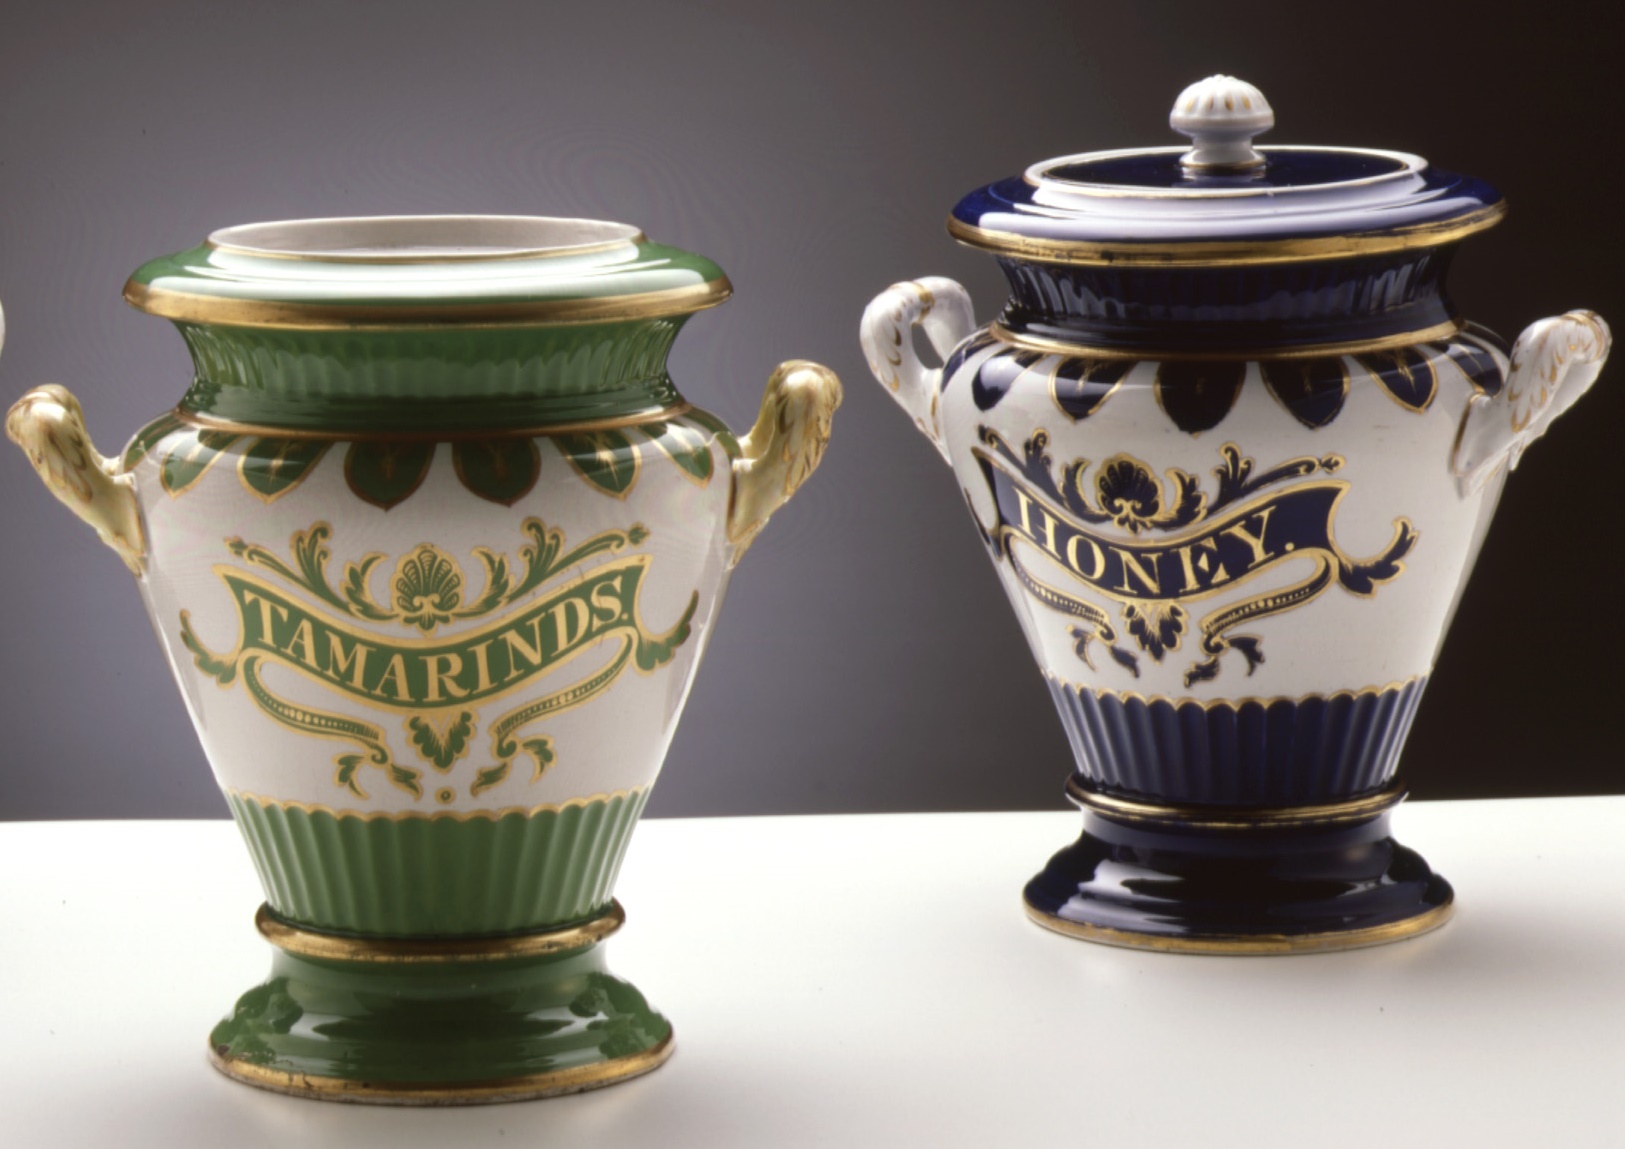 Late 19th century jars for 'Tamarinds' and 'Honey'